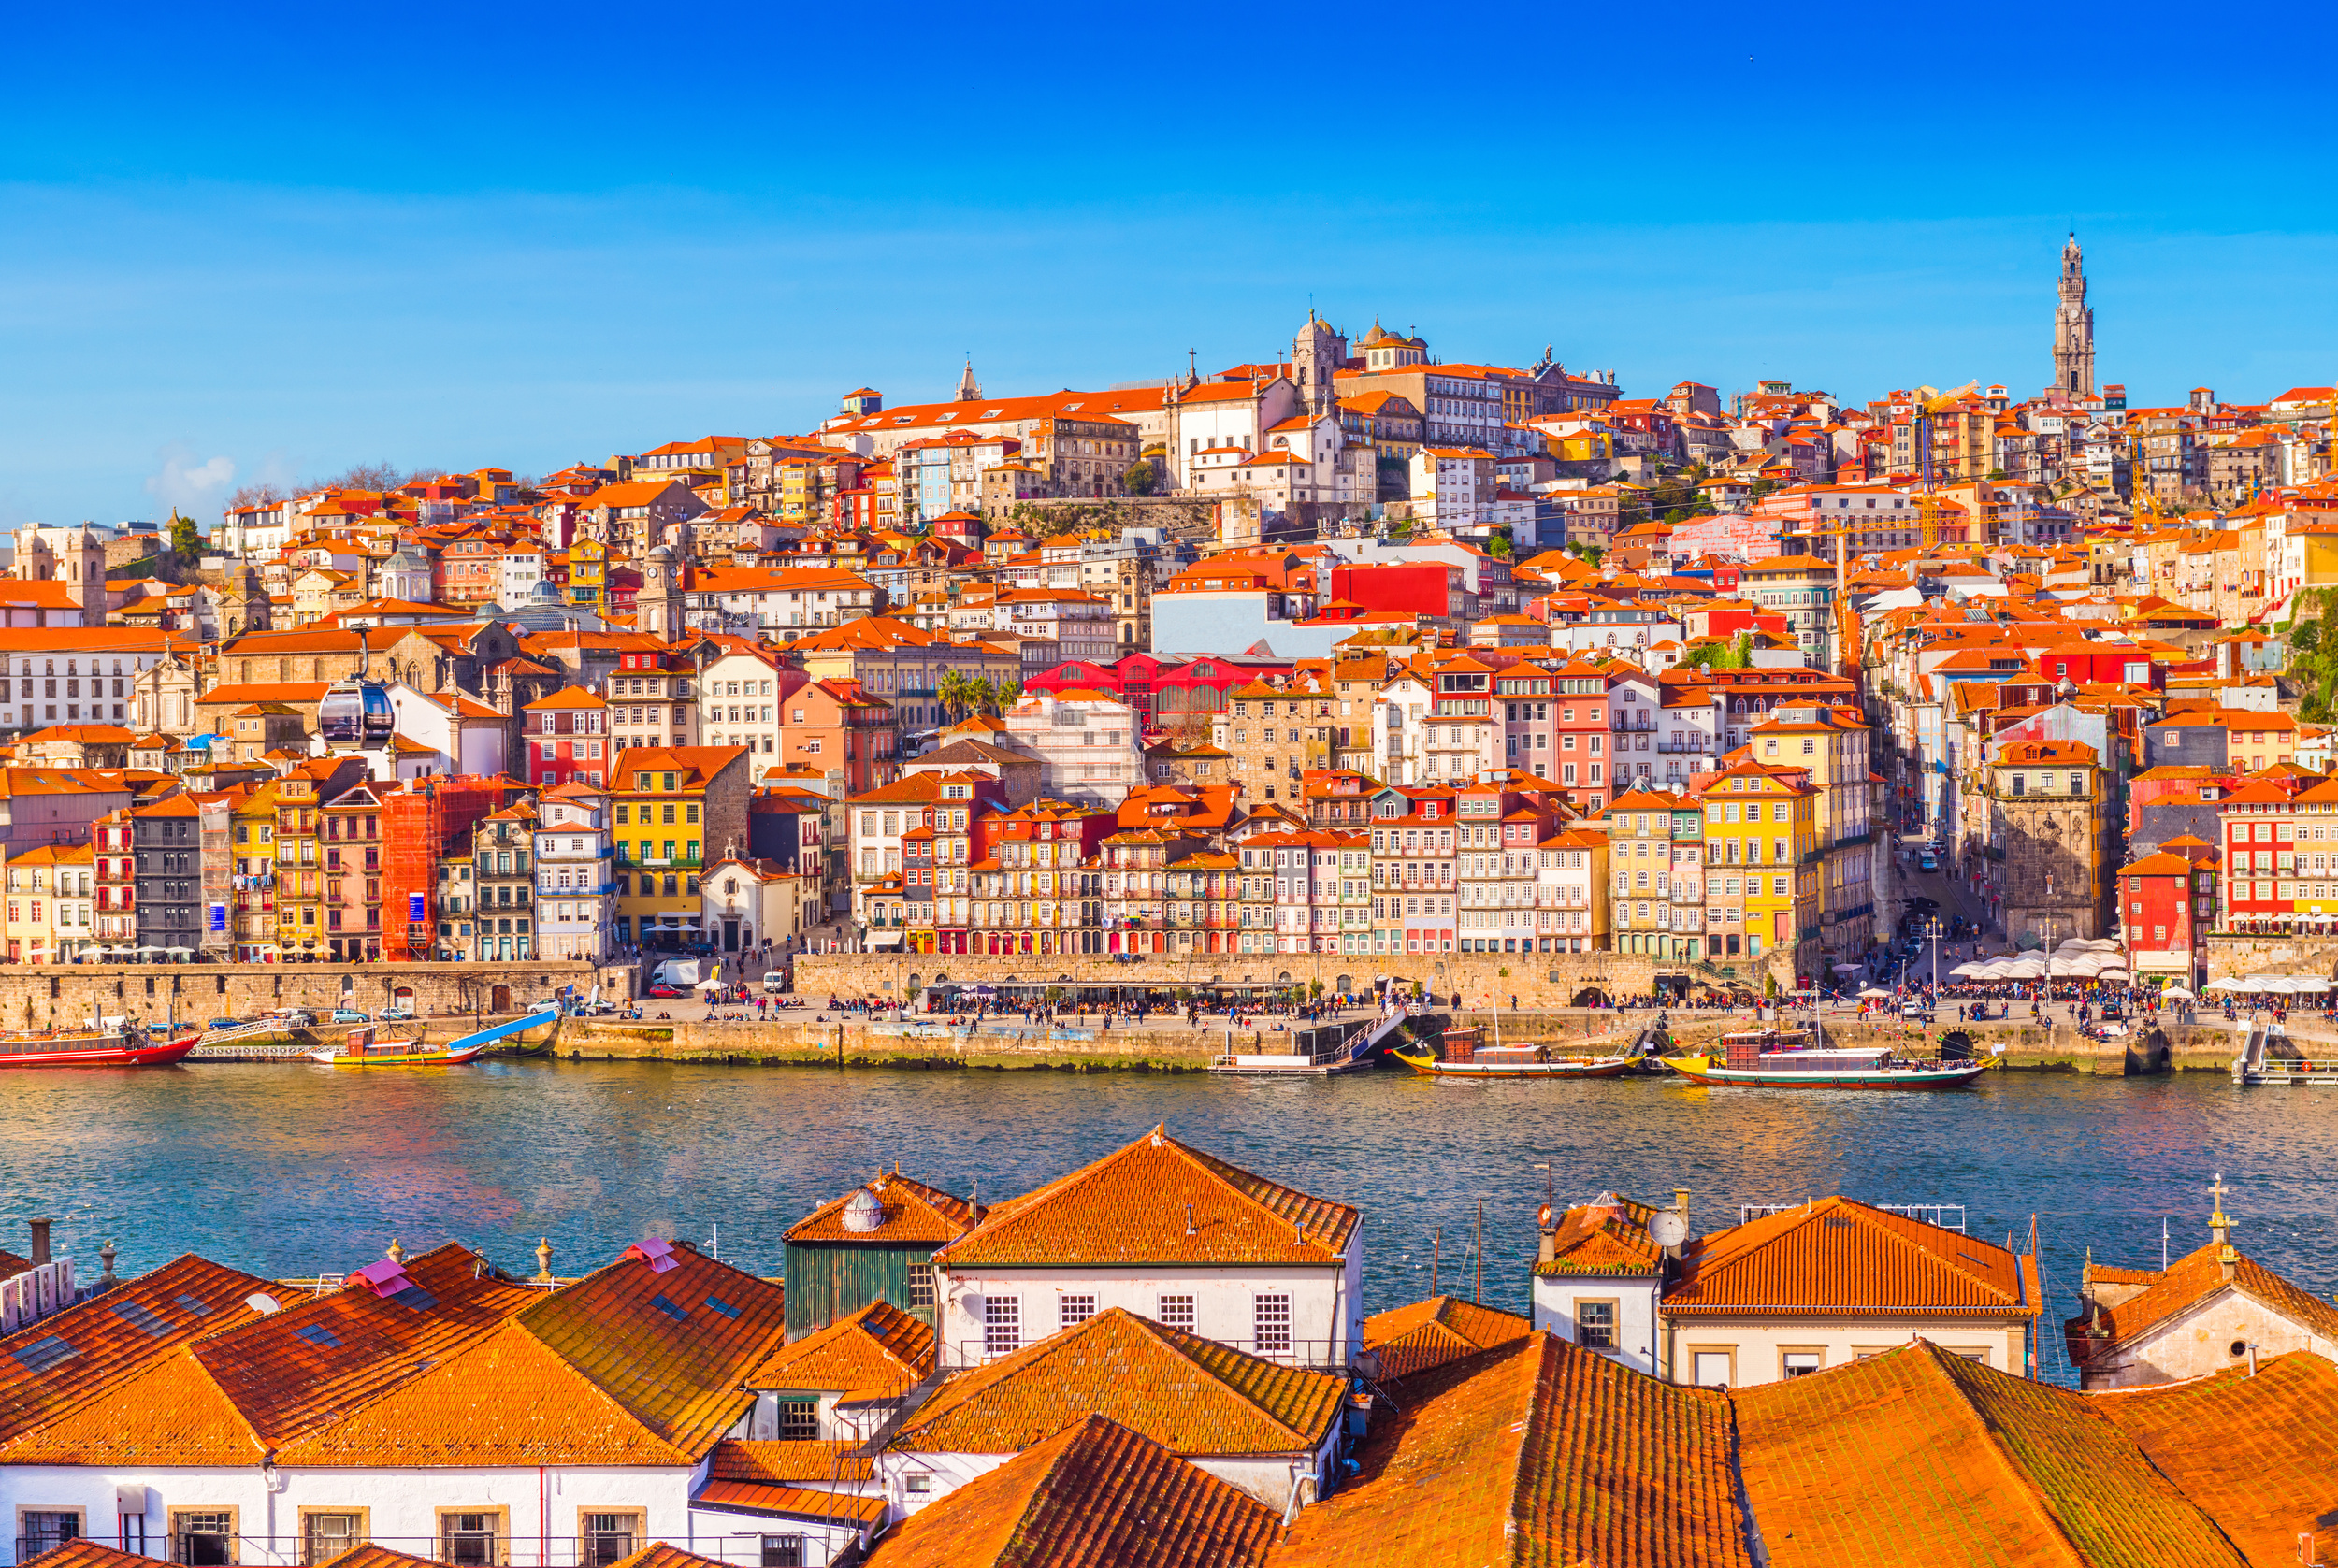 <p>Lisbon has been a hotspot for city-breakers and digital nomads alike in the past decade. However, those in the know head north for the lovely town named Porto. Famous for grand beaches and the wine of the same name, it’s the perfect coastal escape.</p><p><a href='https://www.msn.com/en-us/community/channel/vid-cj9pqbr0vn9in2b6ddcd8sfgpfq6x6utp44fssrv6mc2gtybw0us'>Follow us on MSN to see more of our exclusive lifestyle content.</a></p>